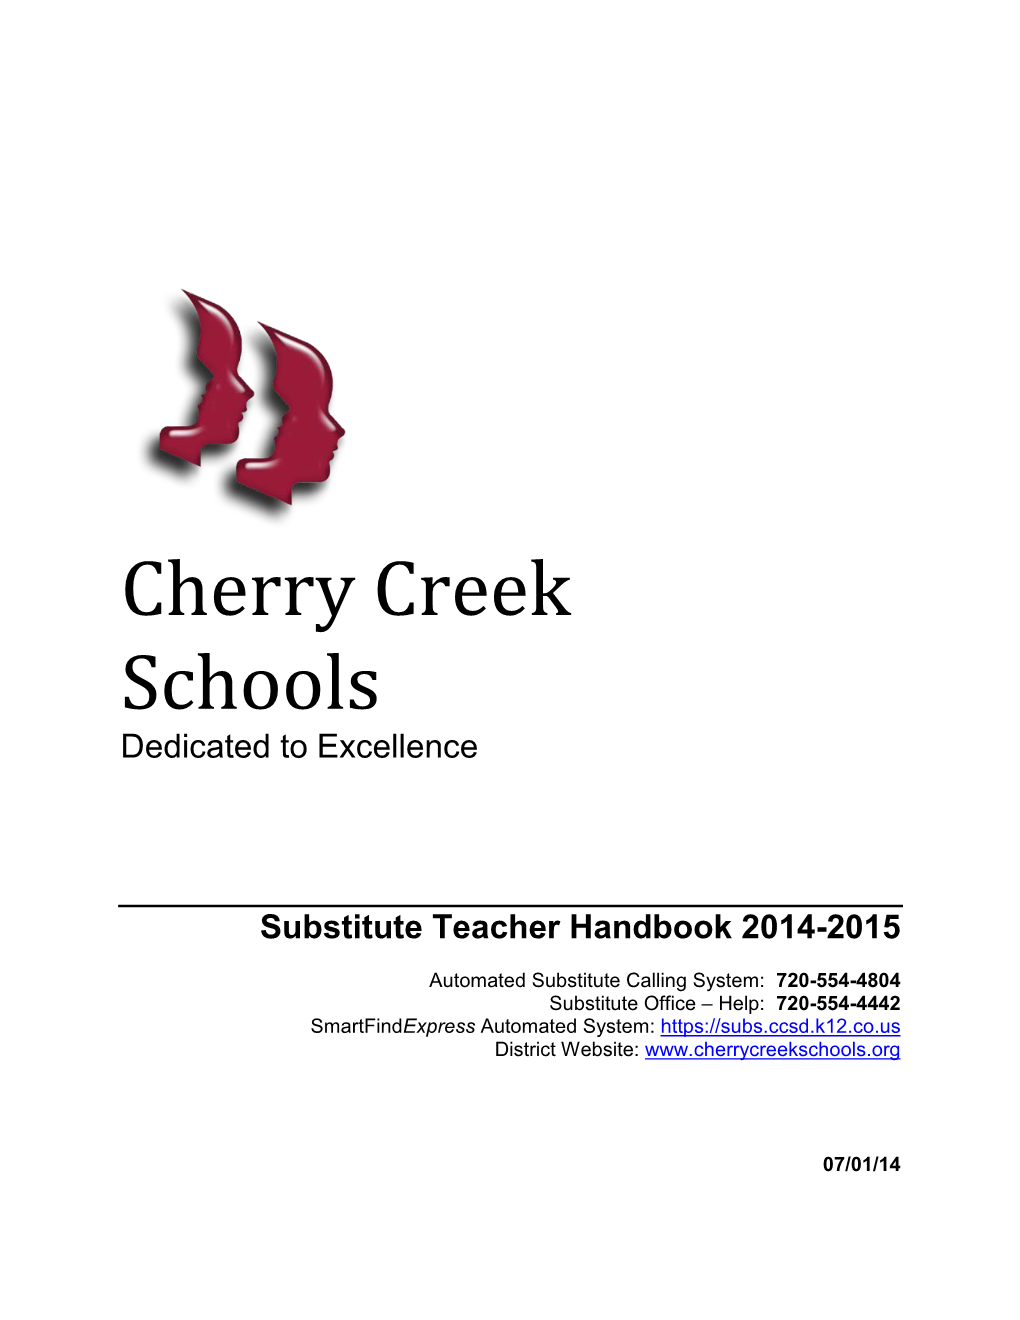 Cherry Creek Schools Dedicated to Excellence